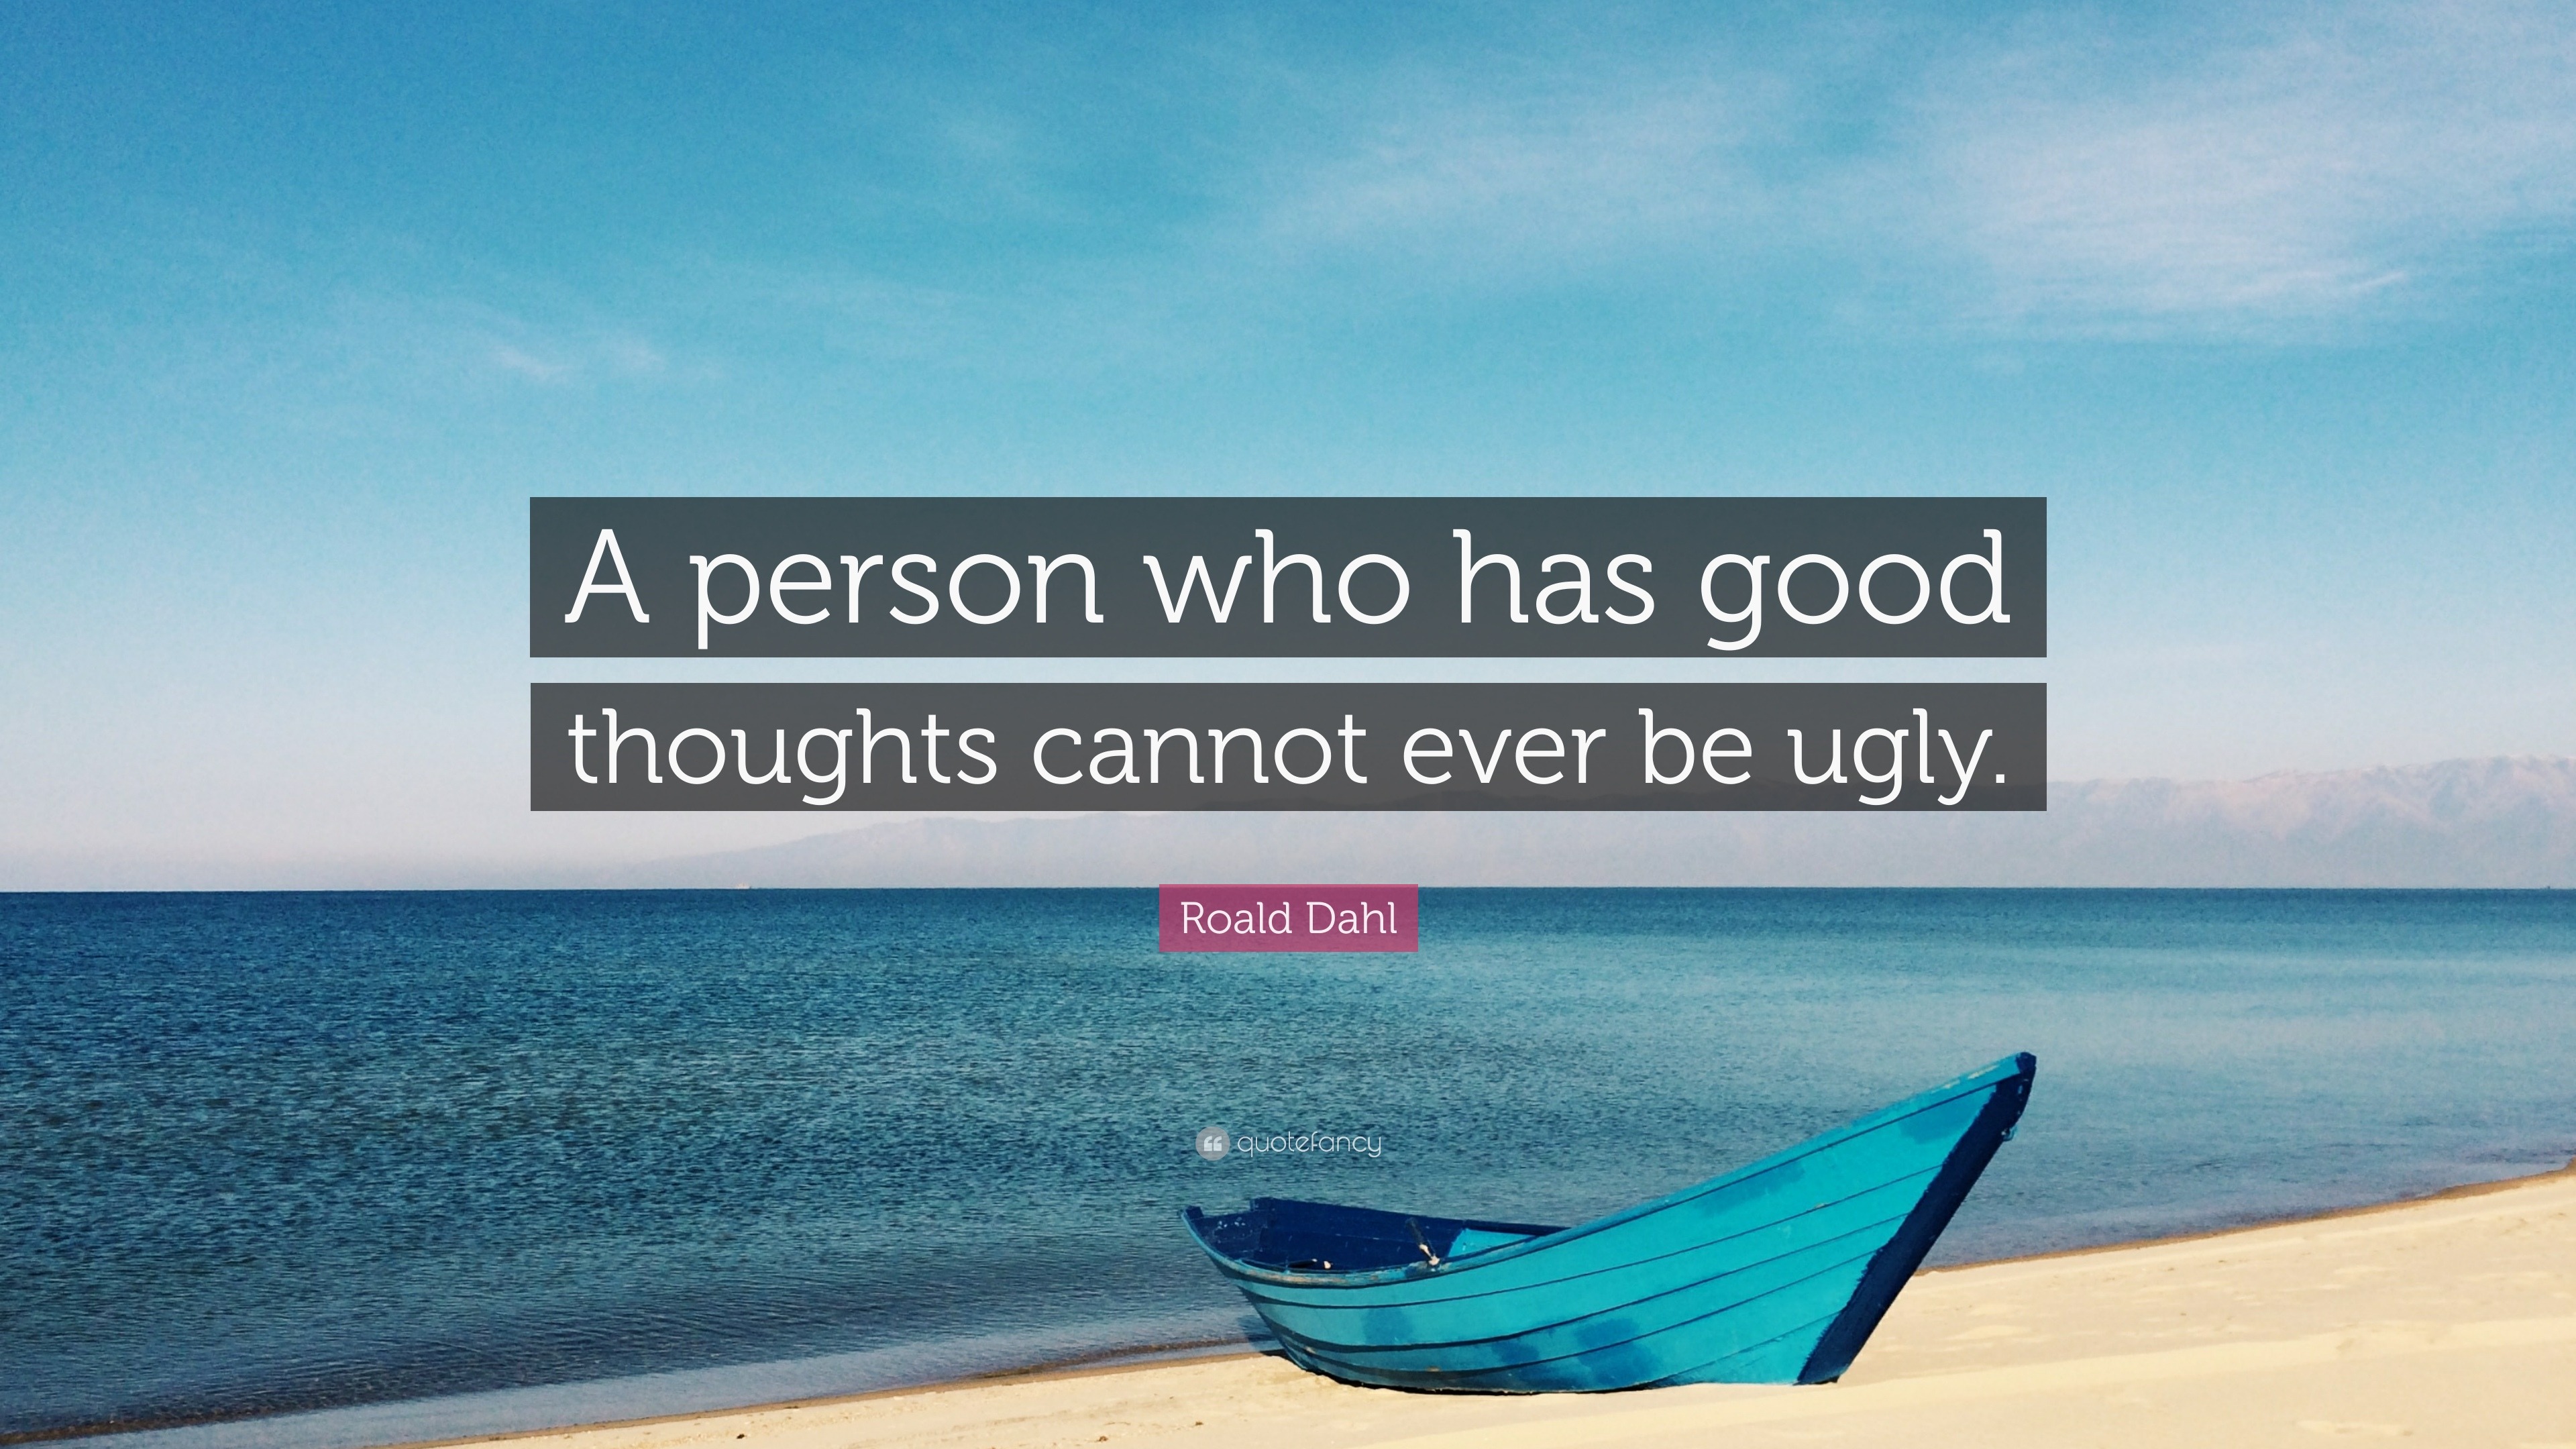 A person who has good thoughts cannot ever